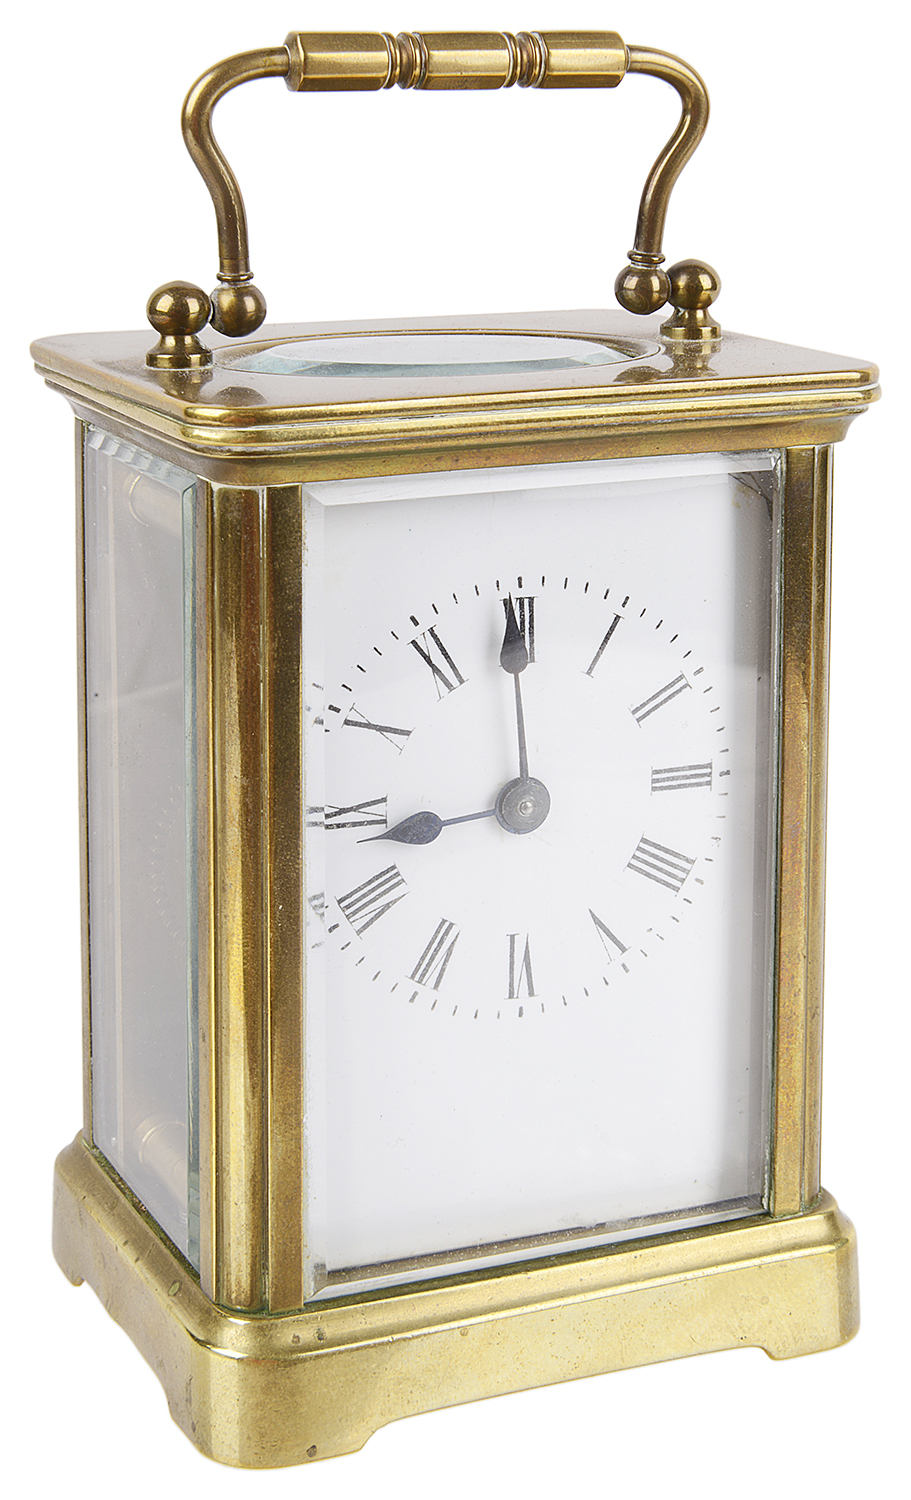 A four glass brass carriage clock, 20th century